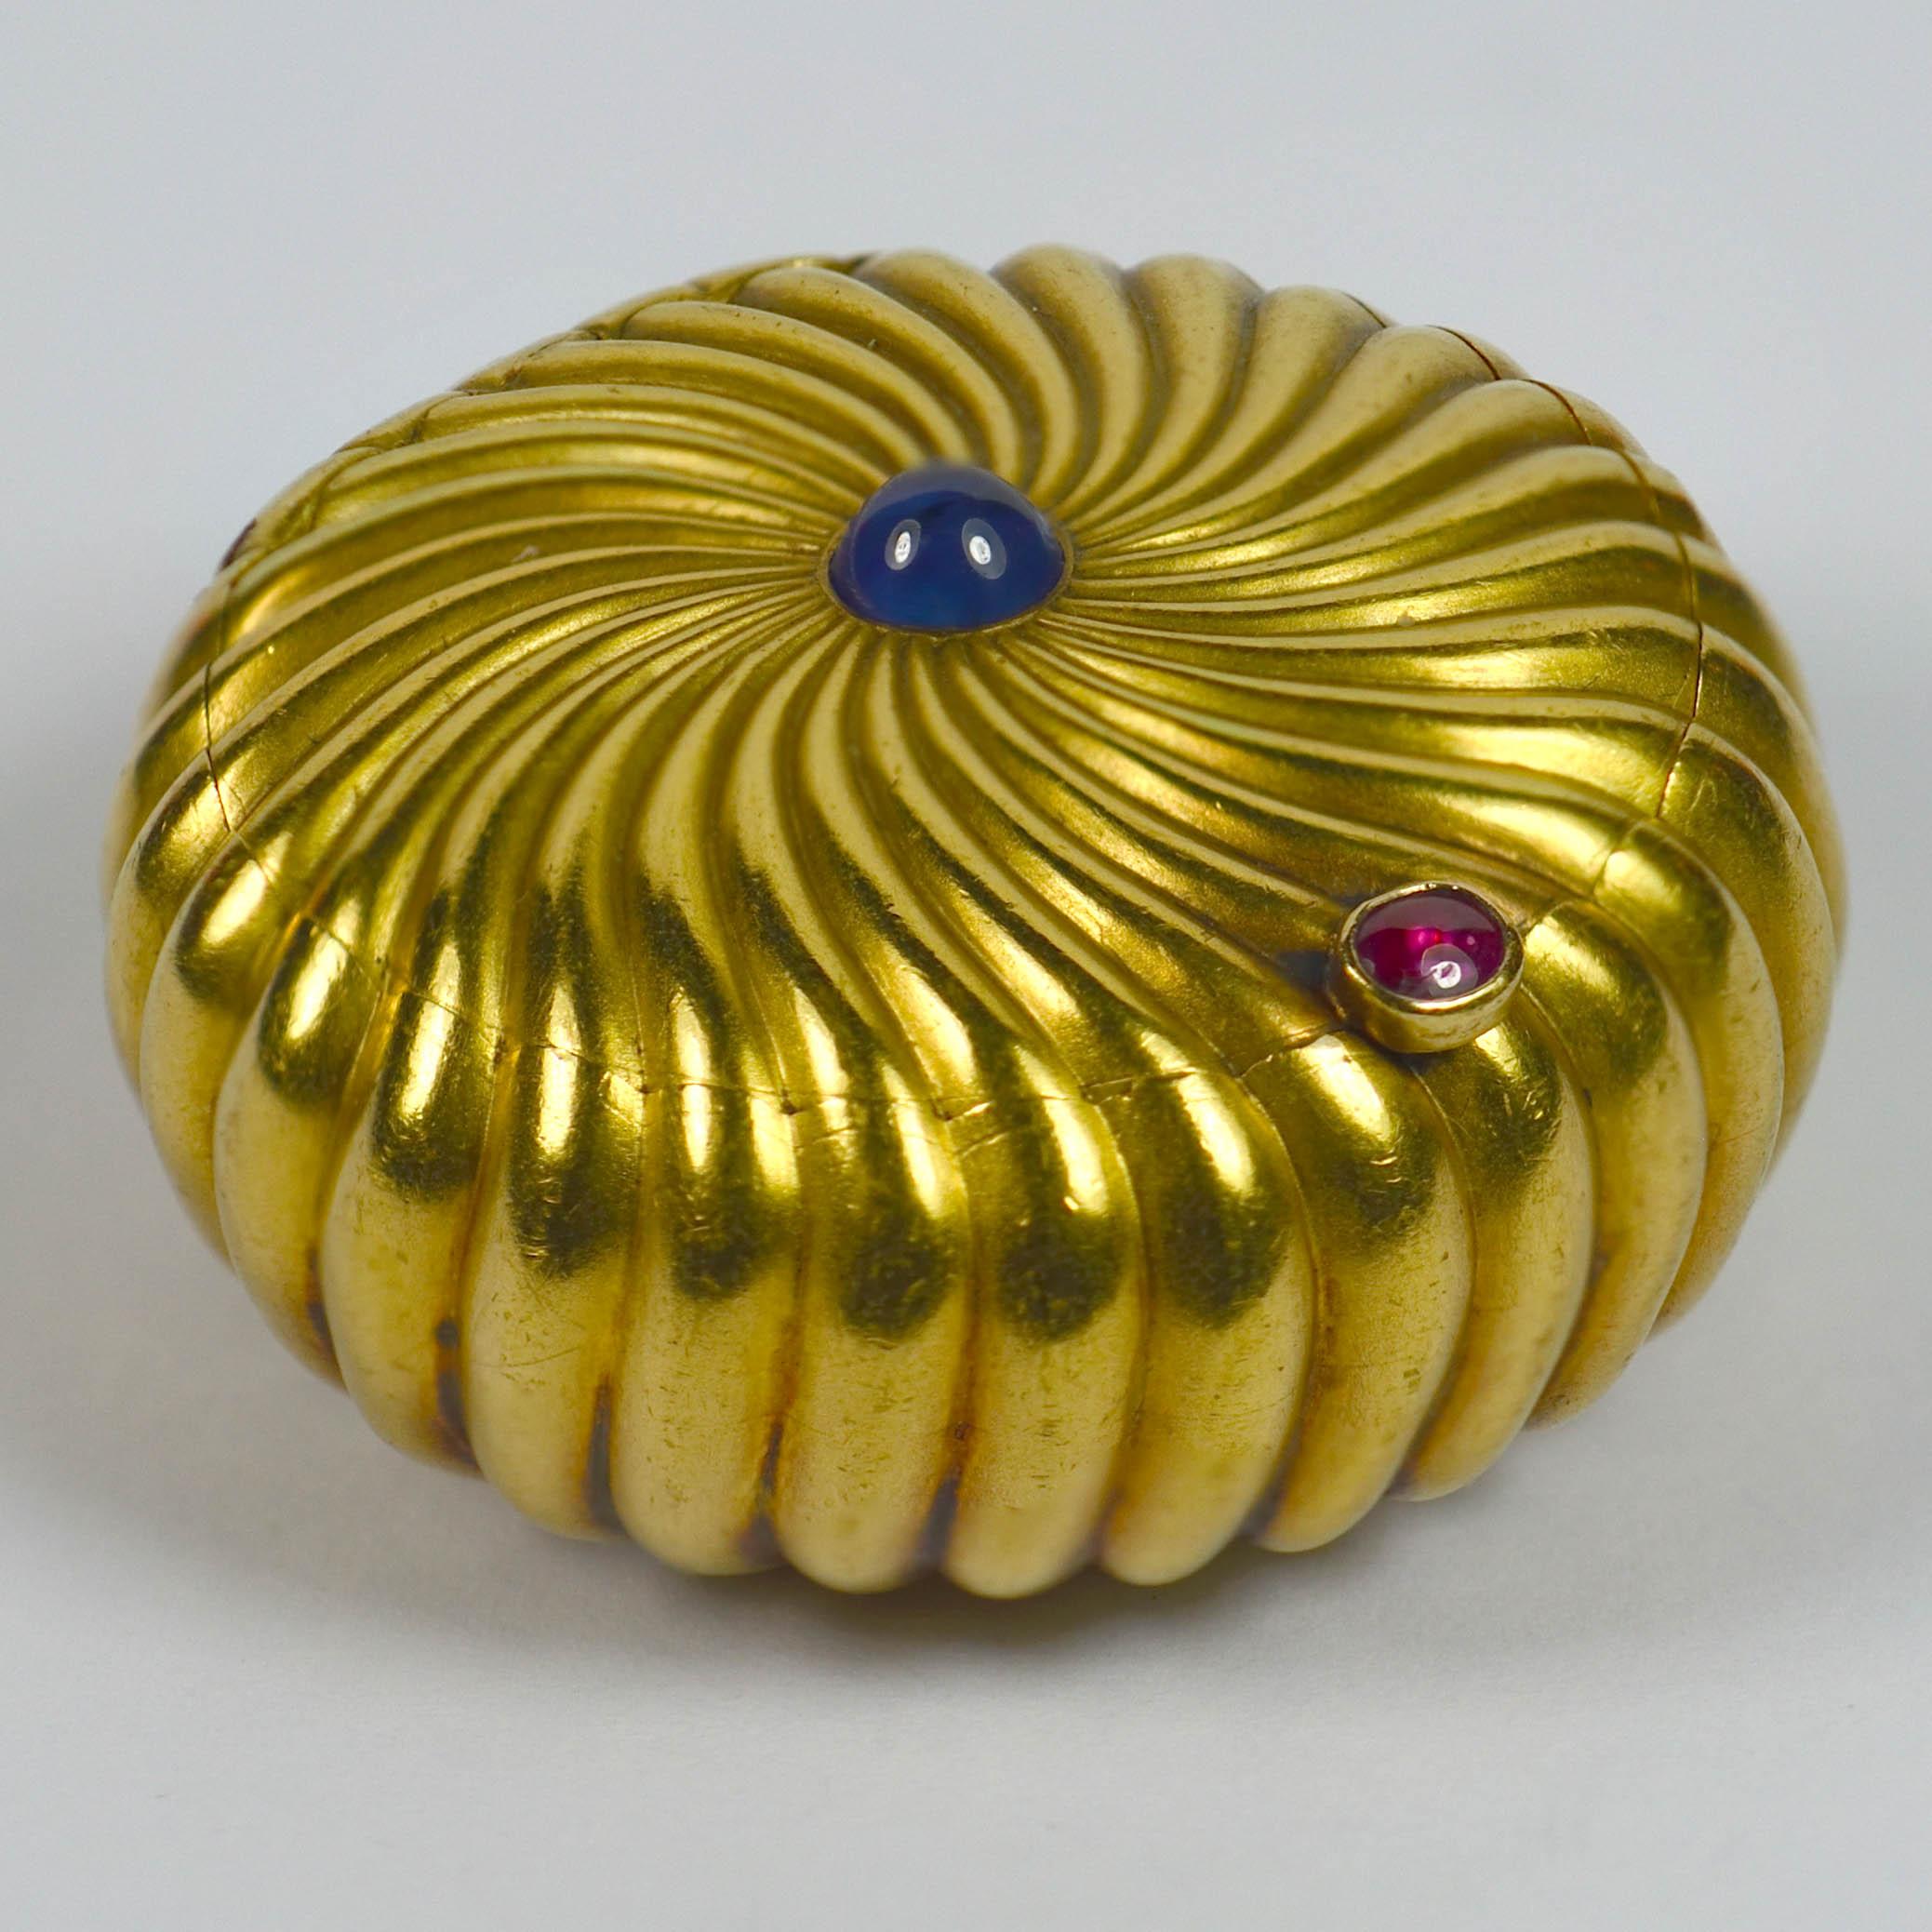 A lovely 18 carat gold pill box with a spiralling godronne motif set with a natural sapphire cabochon to the centre. The opening of the lid is set with a natural ruby cabochon.

Formerly owned by the Duchesse du Massa of France.

French import marks